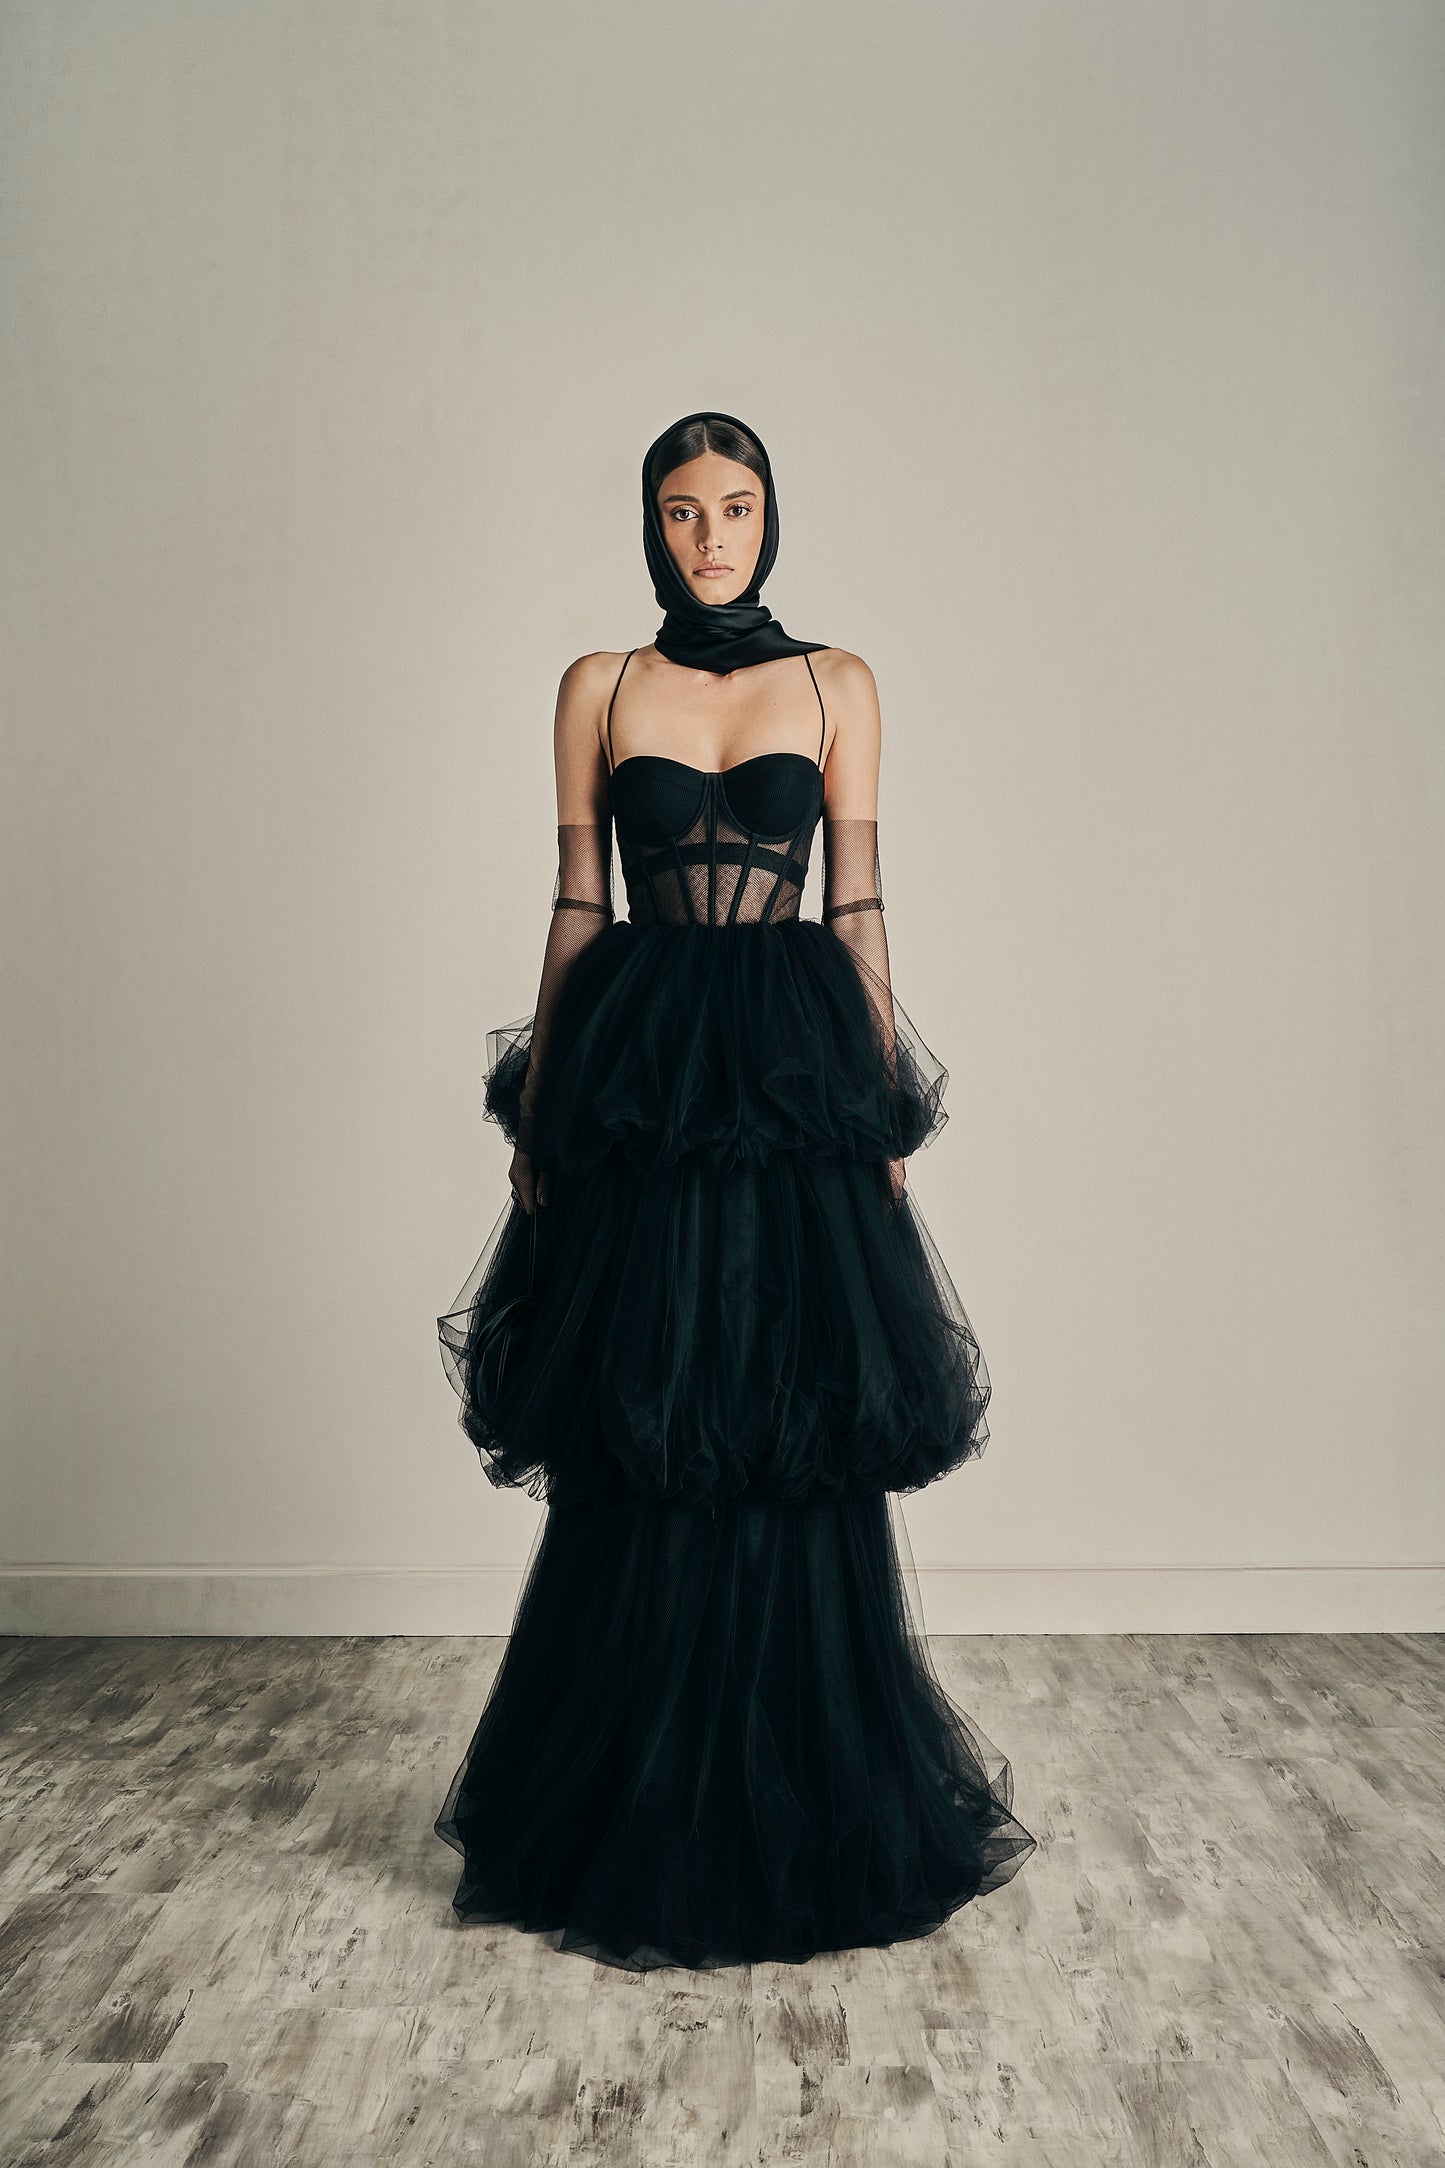 Her Black Evening Gown